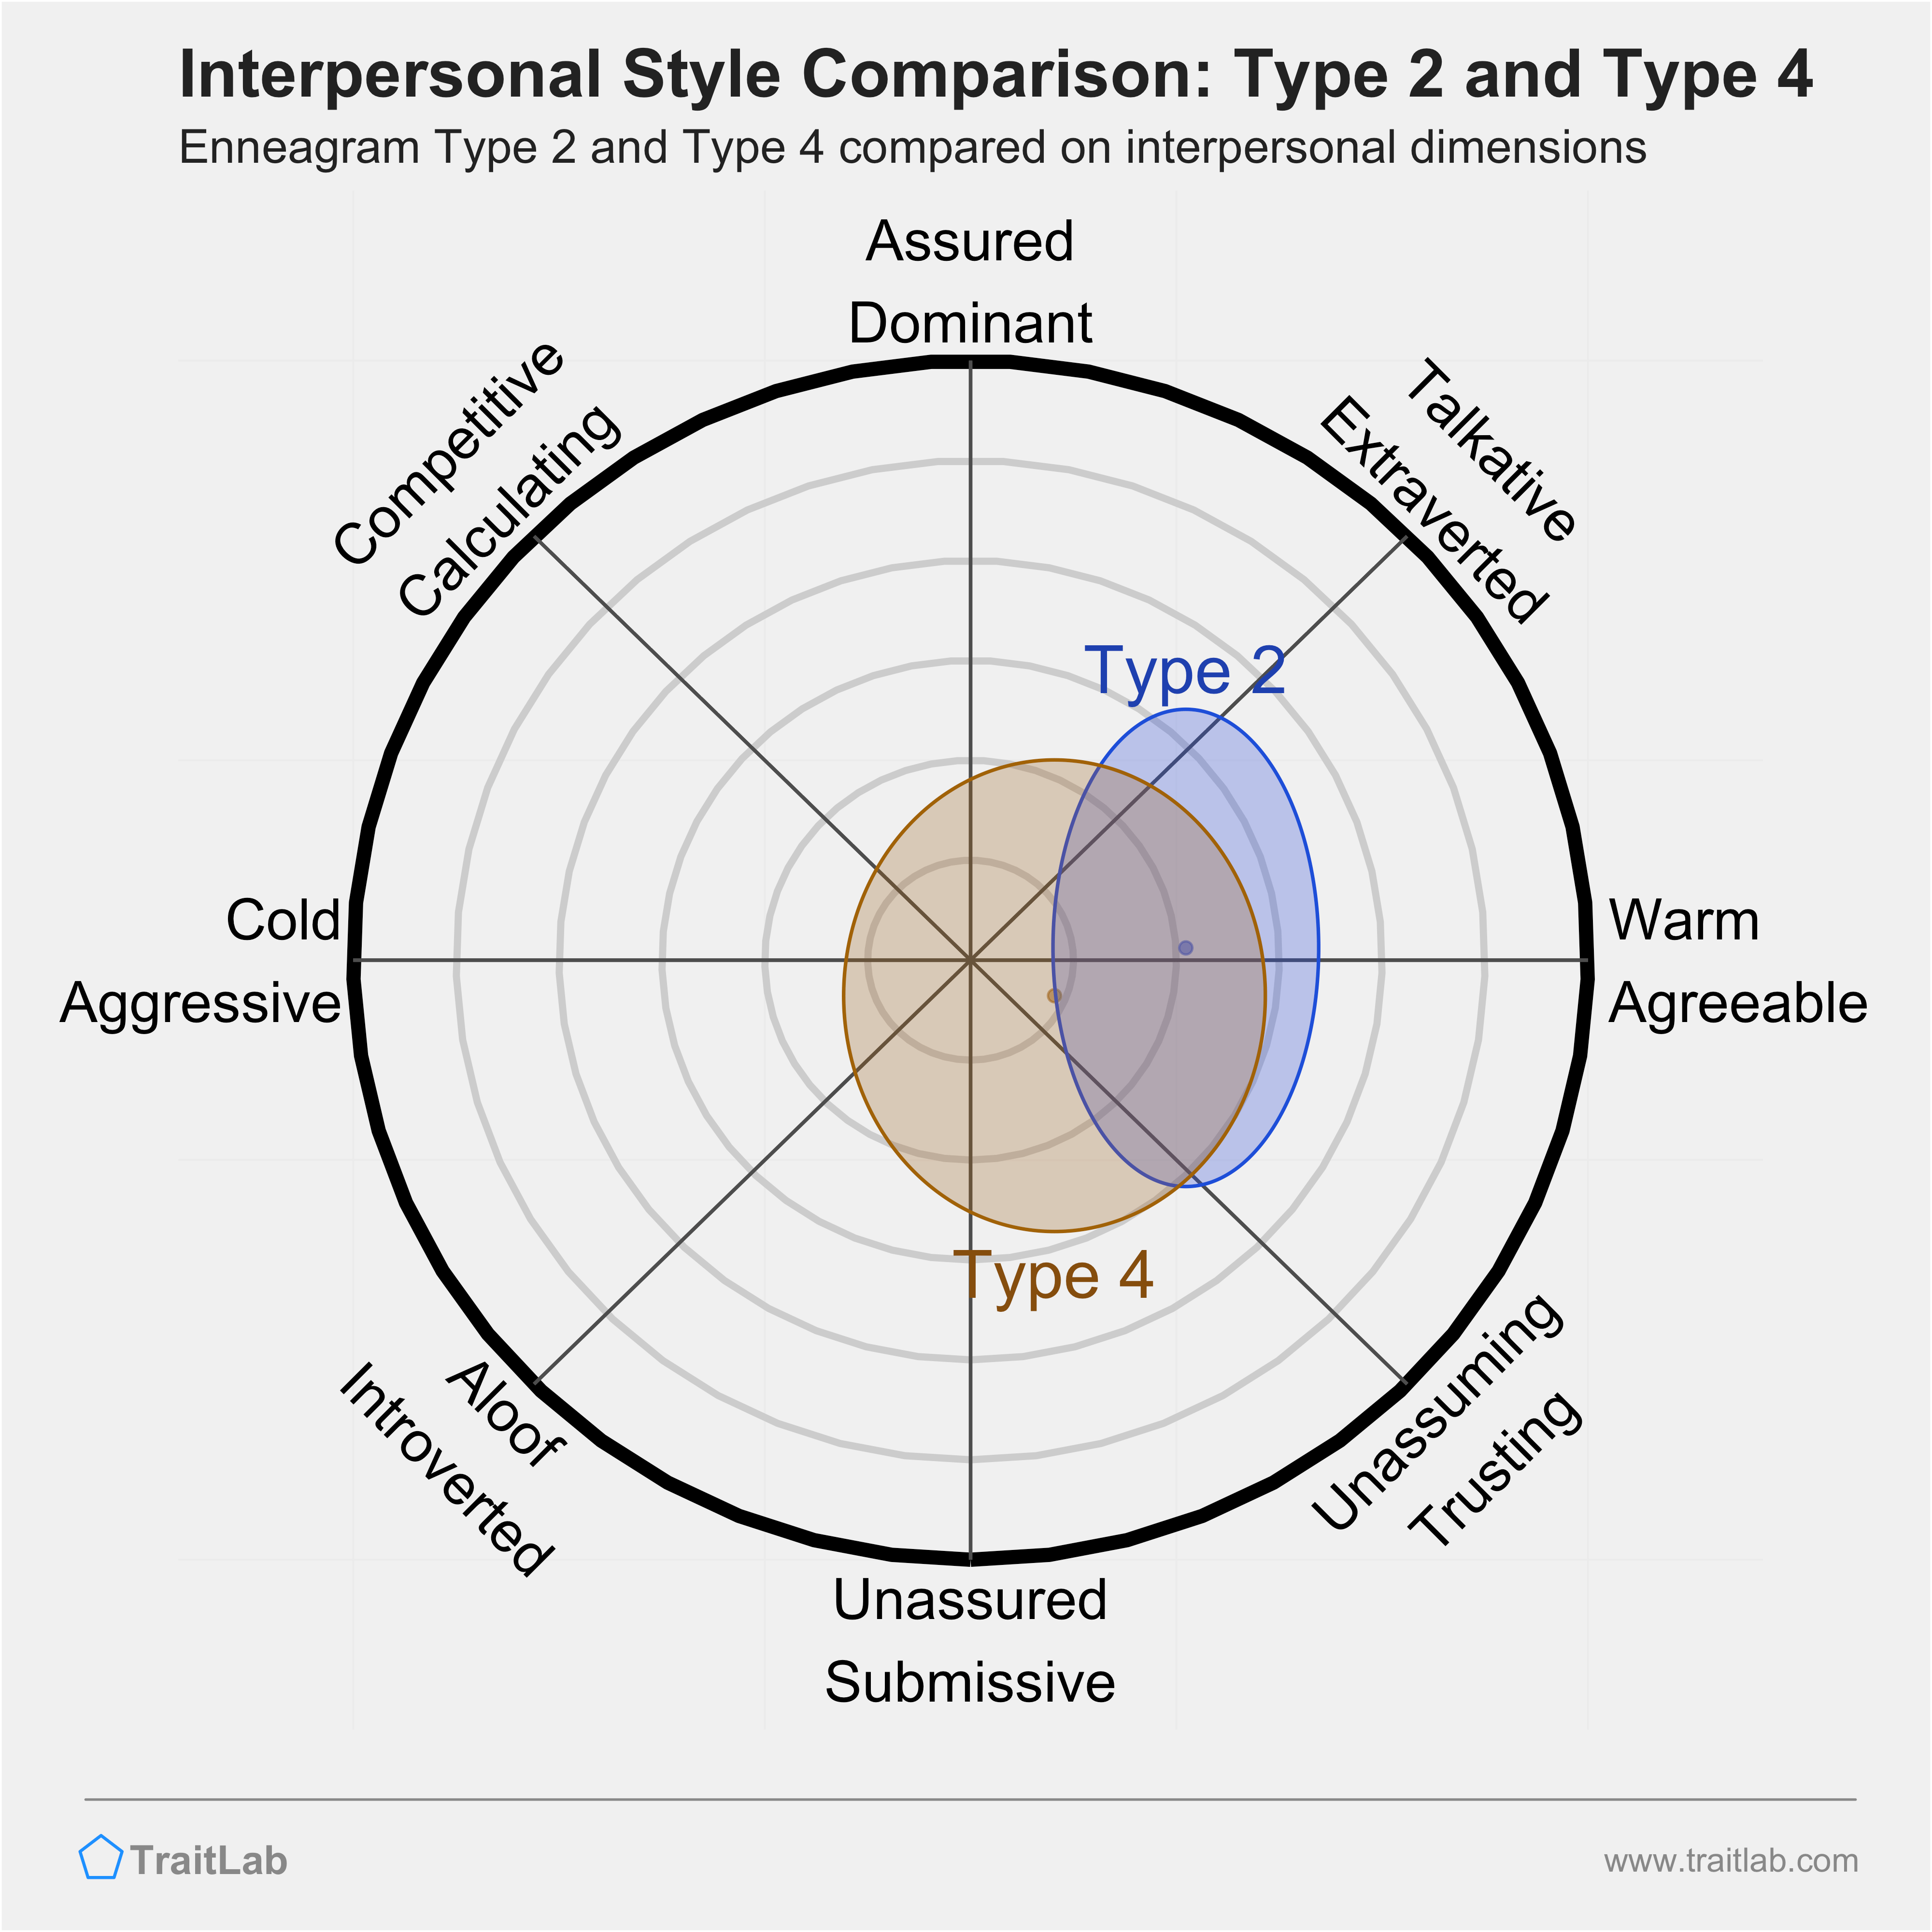 Enneagram Type 2 and Type 4 comparison across interpersonal dimensions